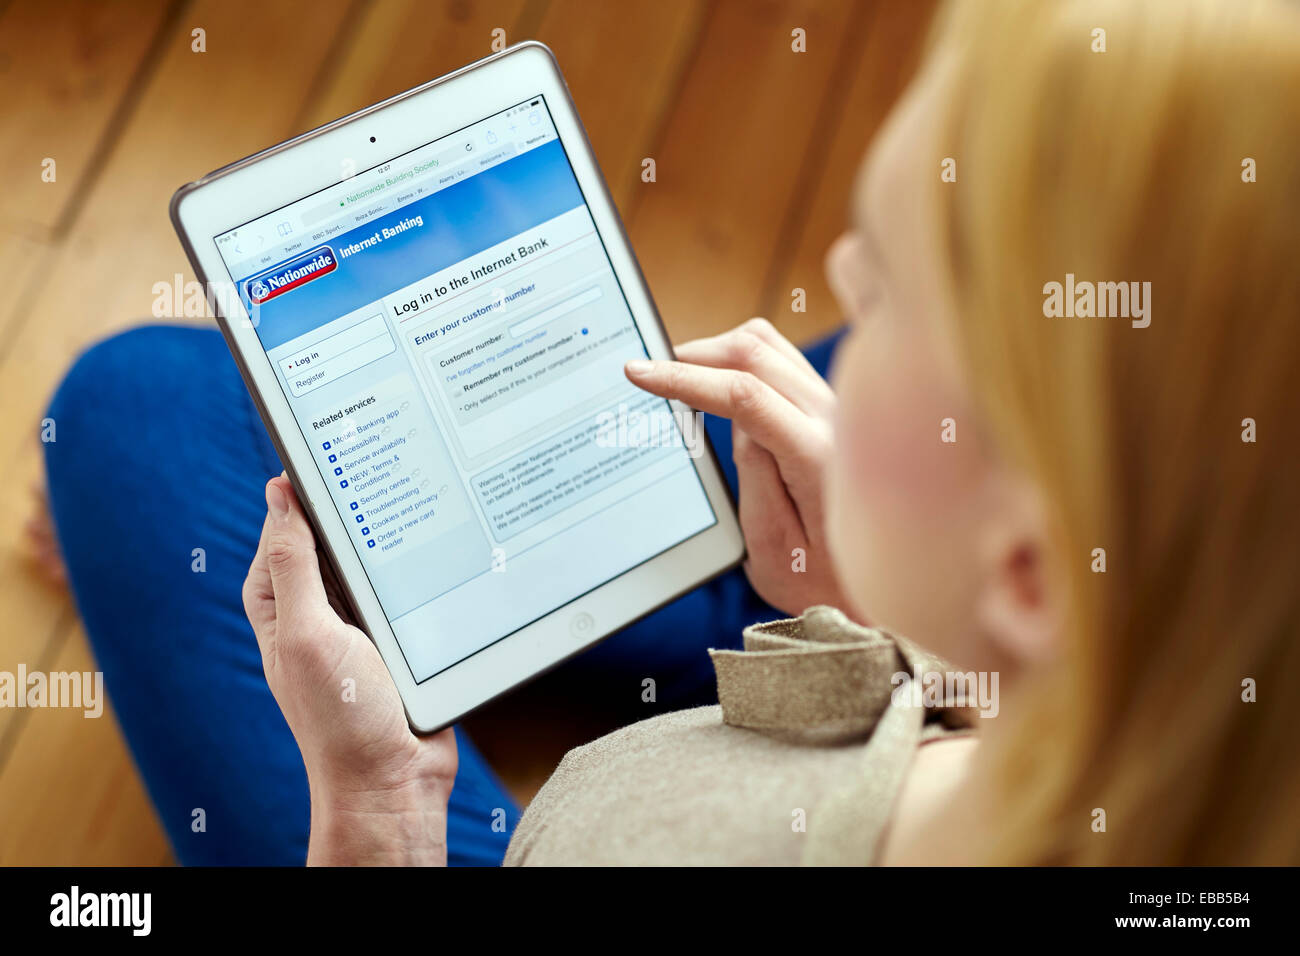 Woman banking online using an iPad Stock Photo